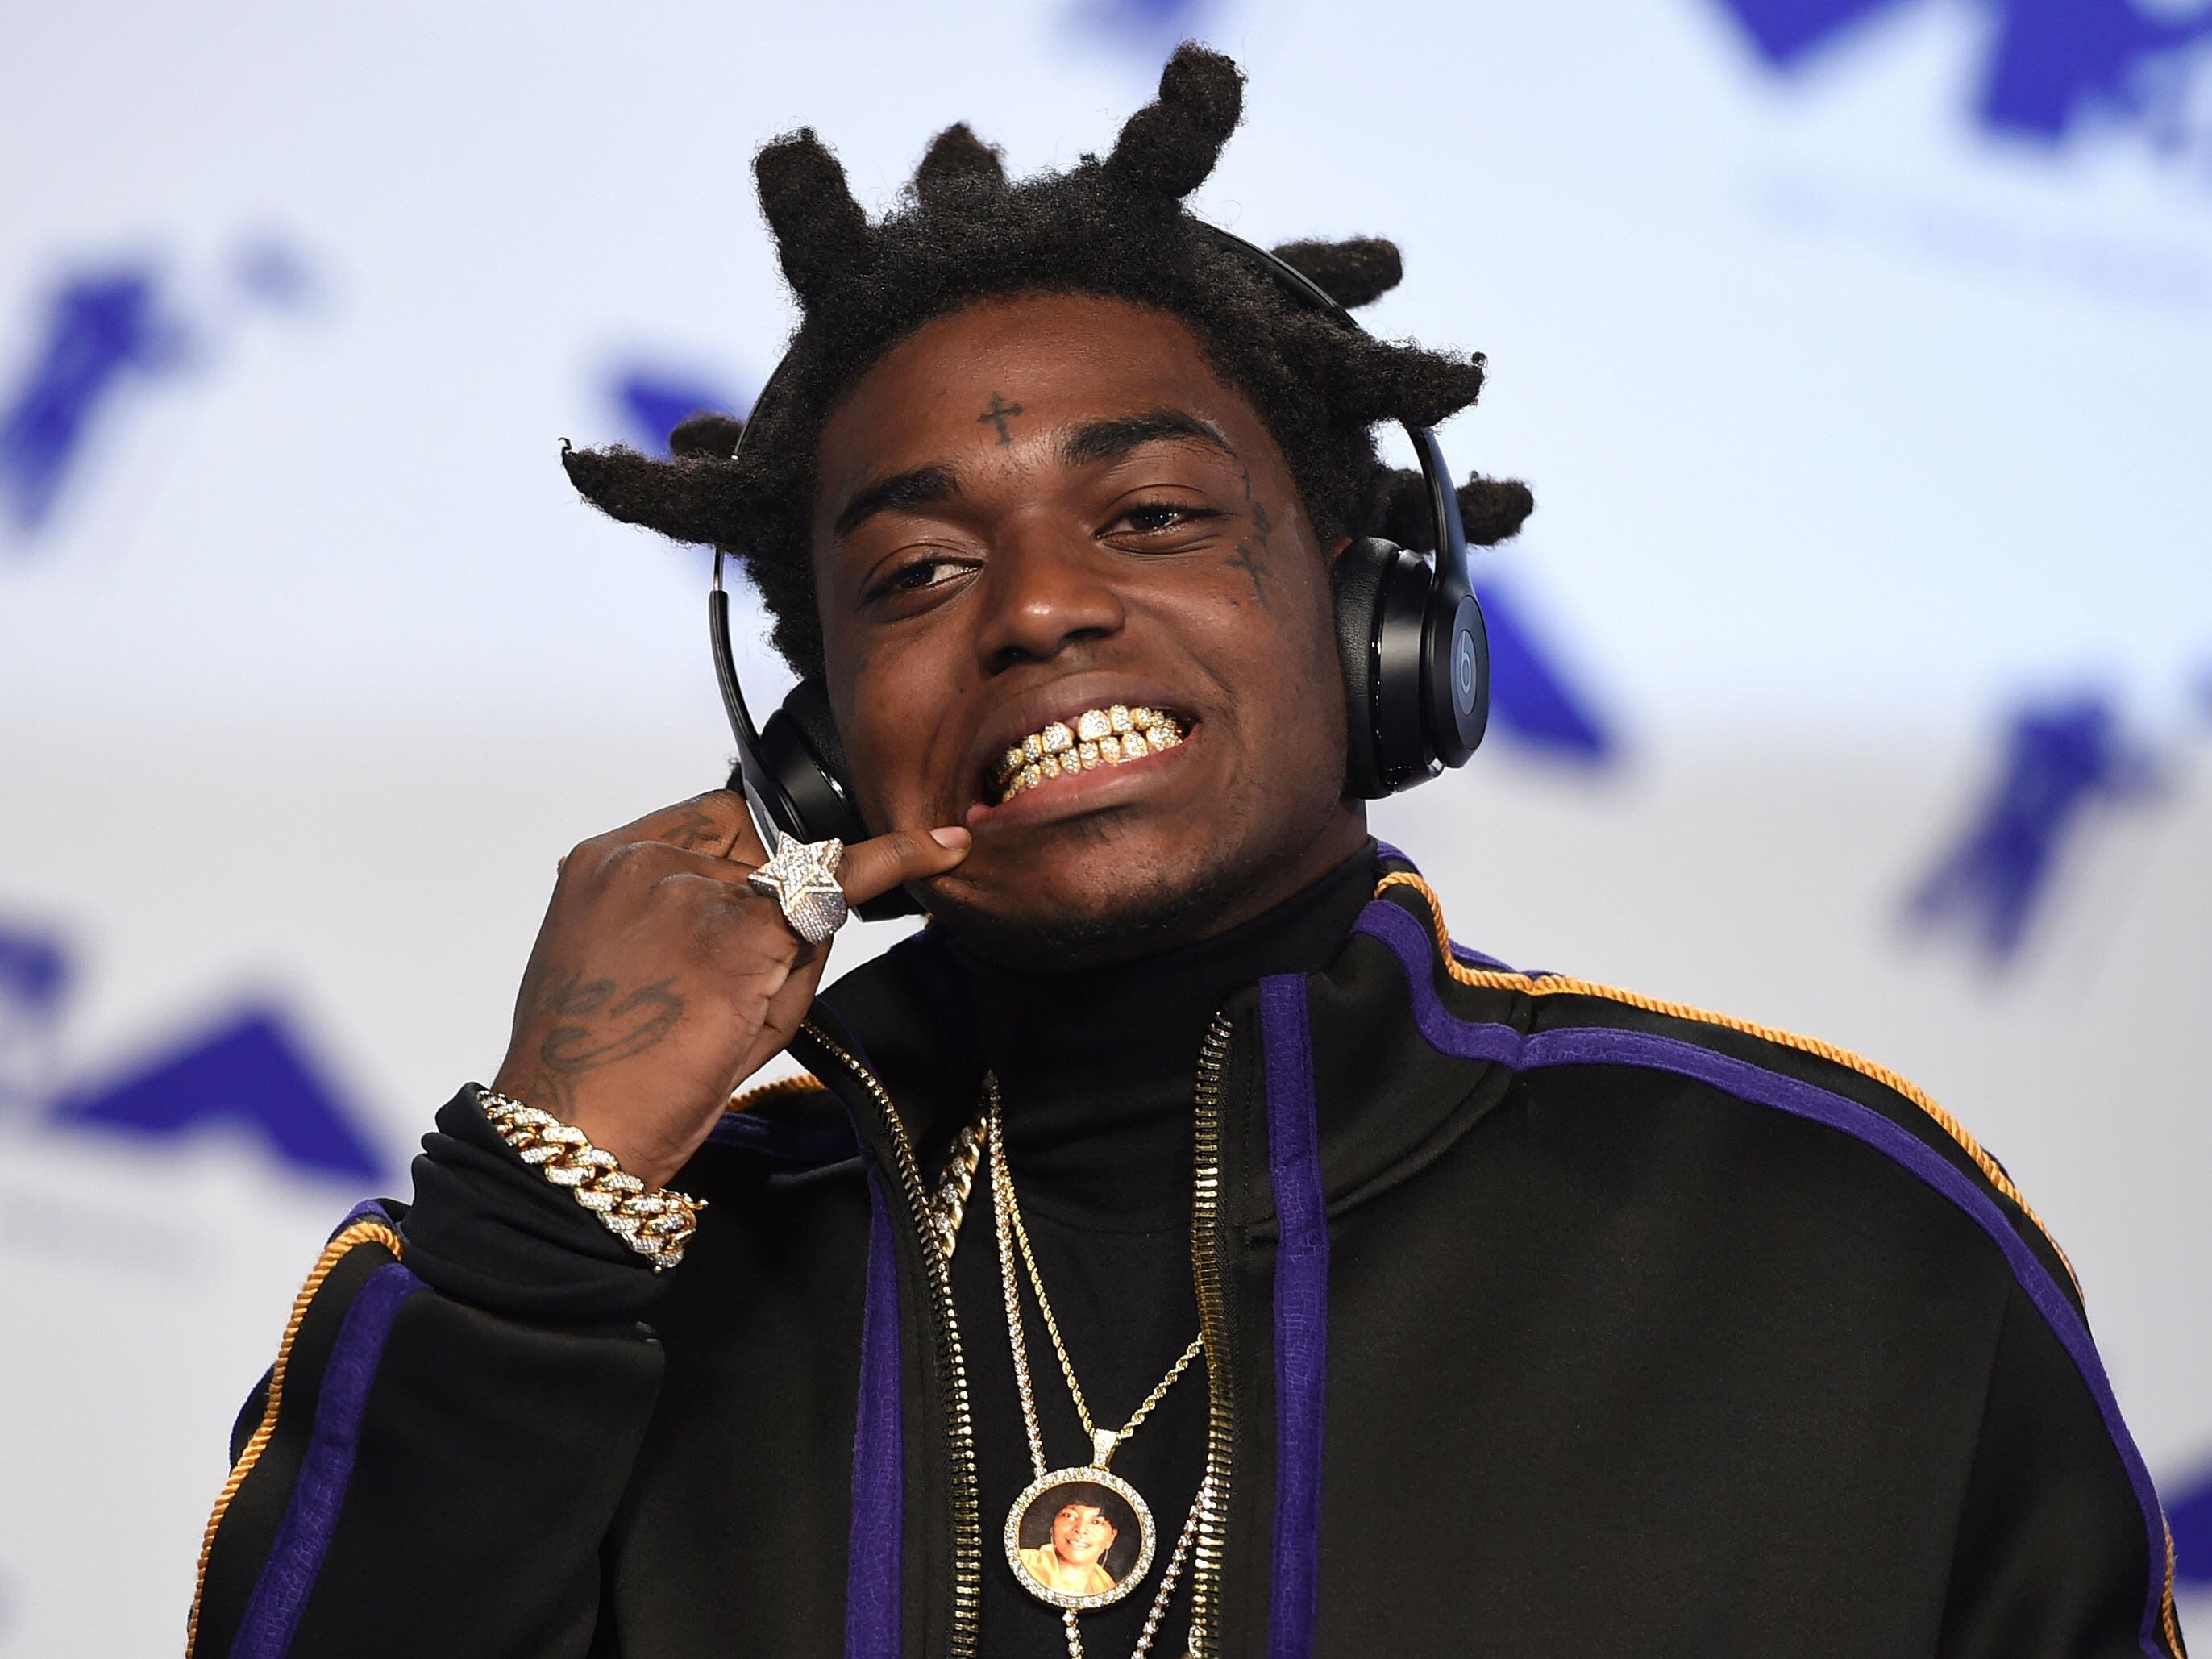 Rapper Kodak Black arrested on cocaine charges in Florida